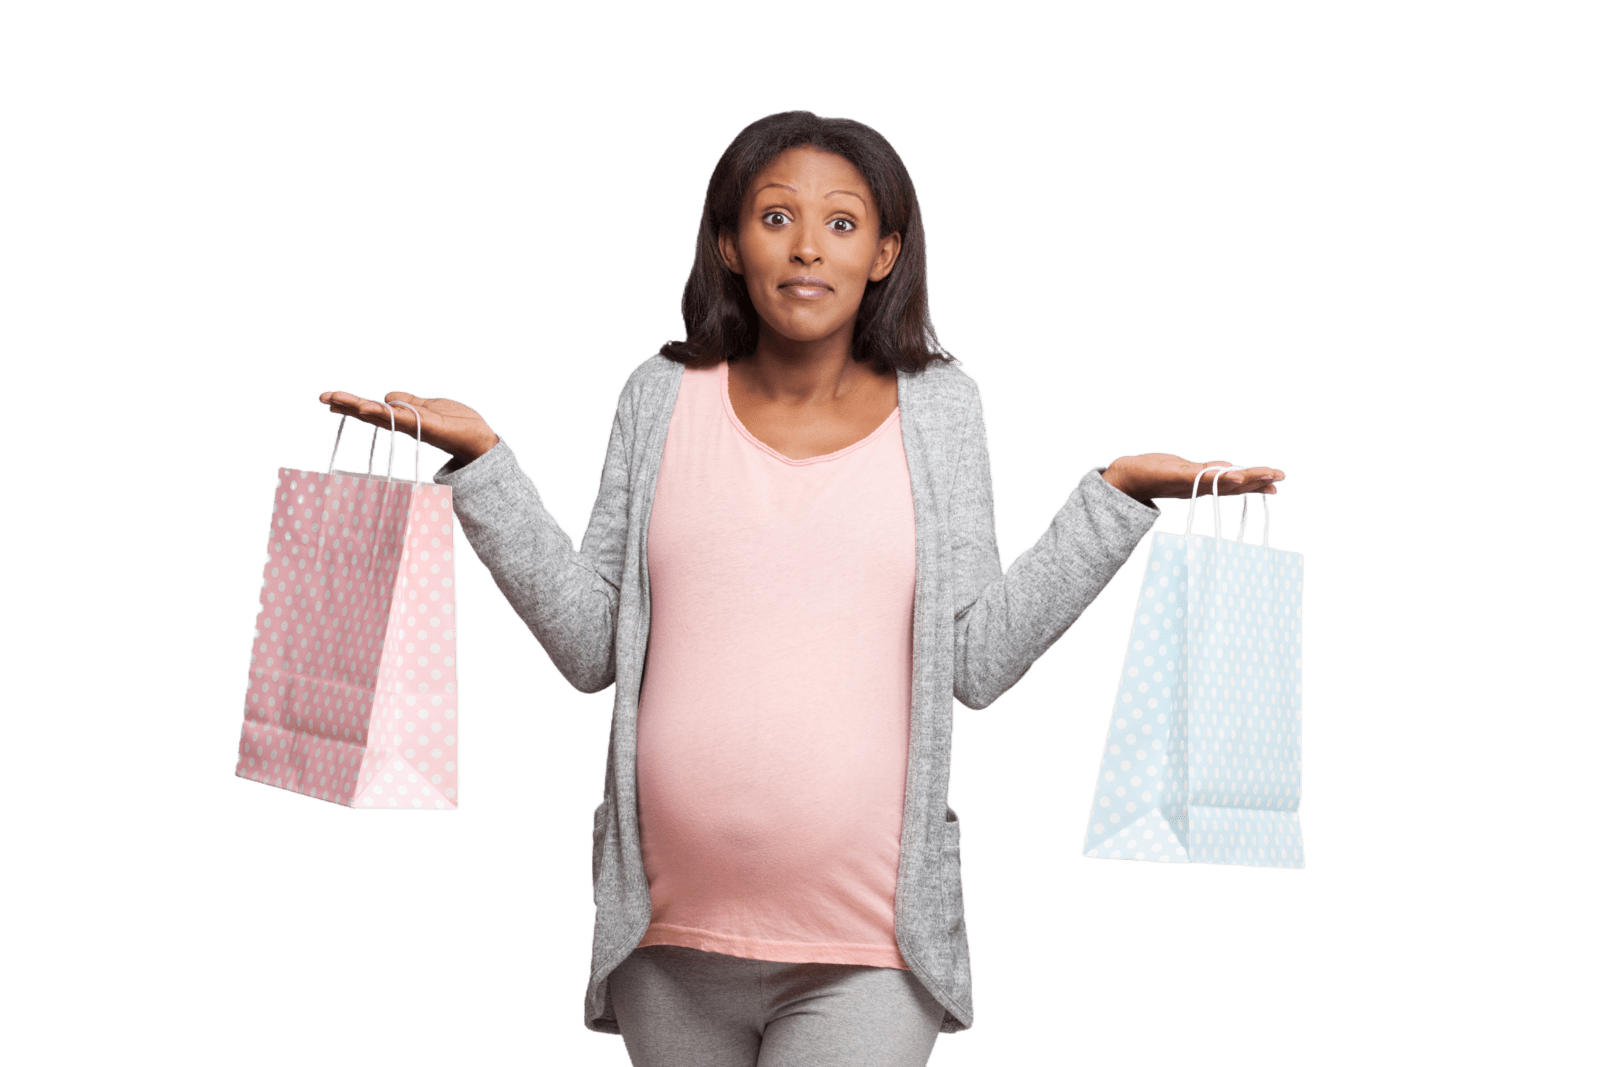 Pregnant woman holding two gift bags with an unsure face